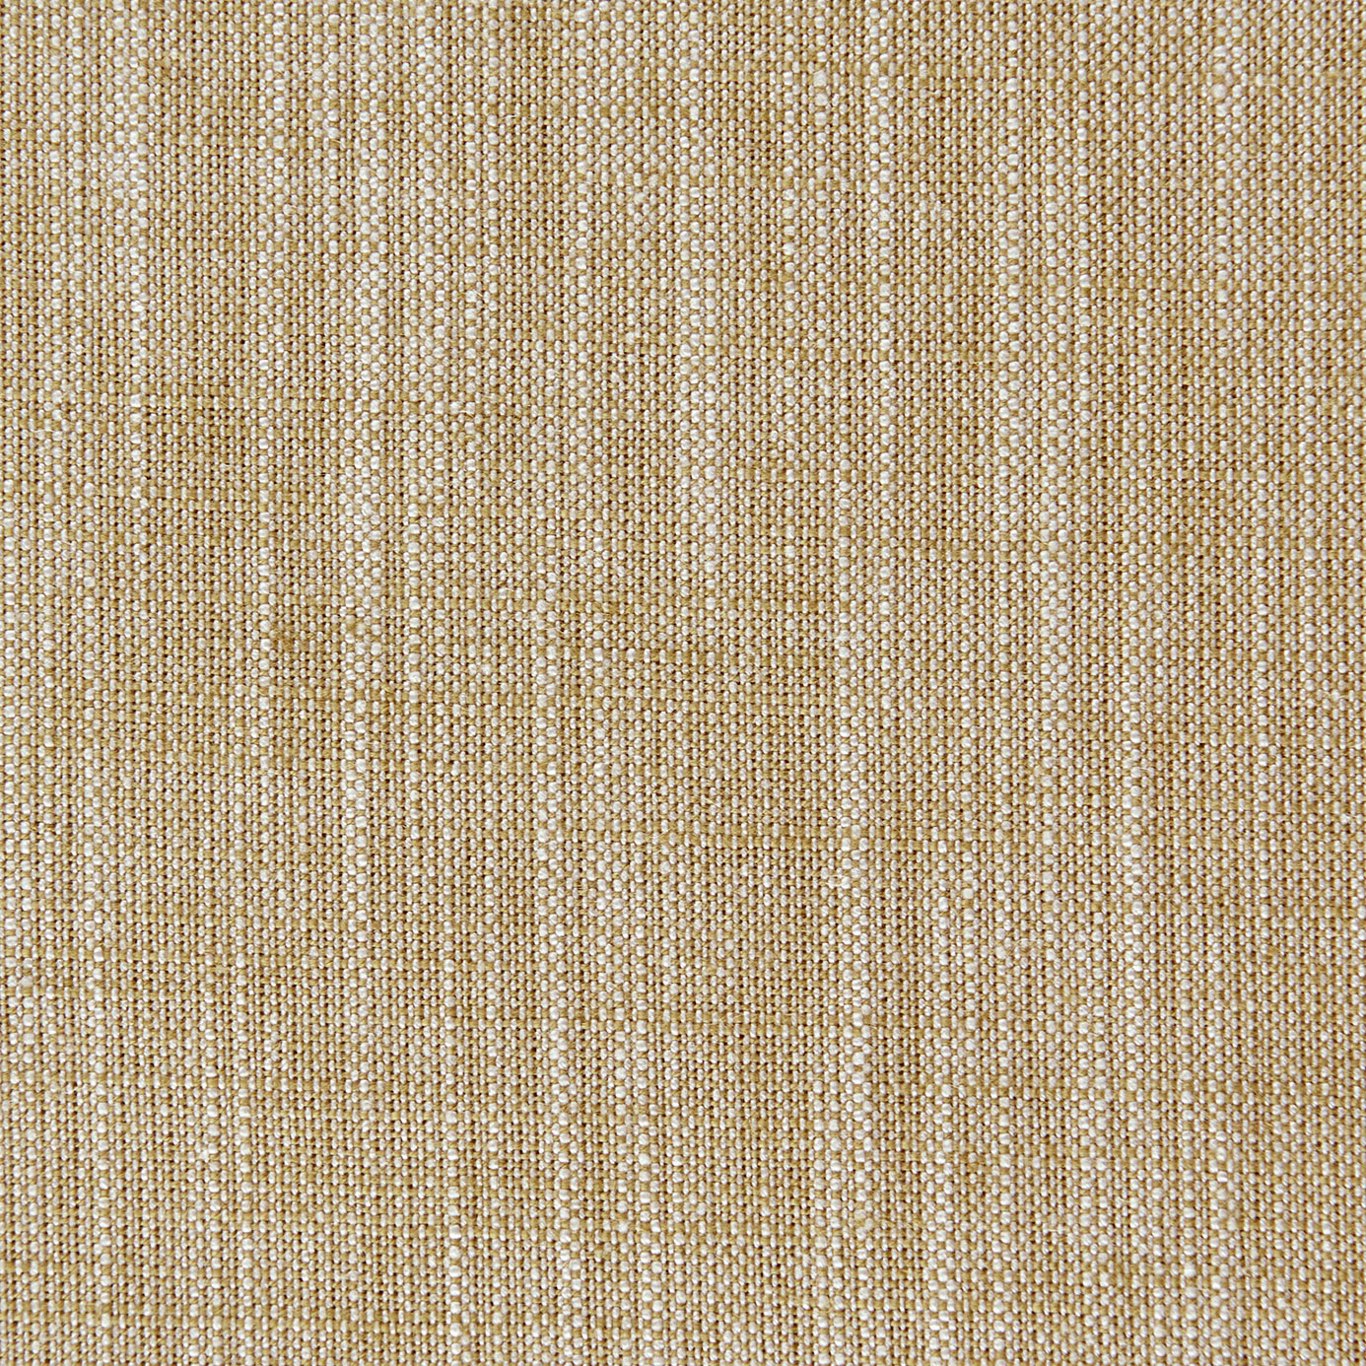 Biarritz Sand Fabric by CNC